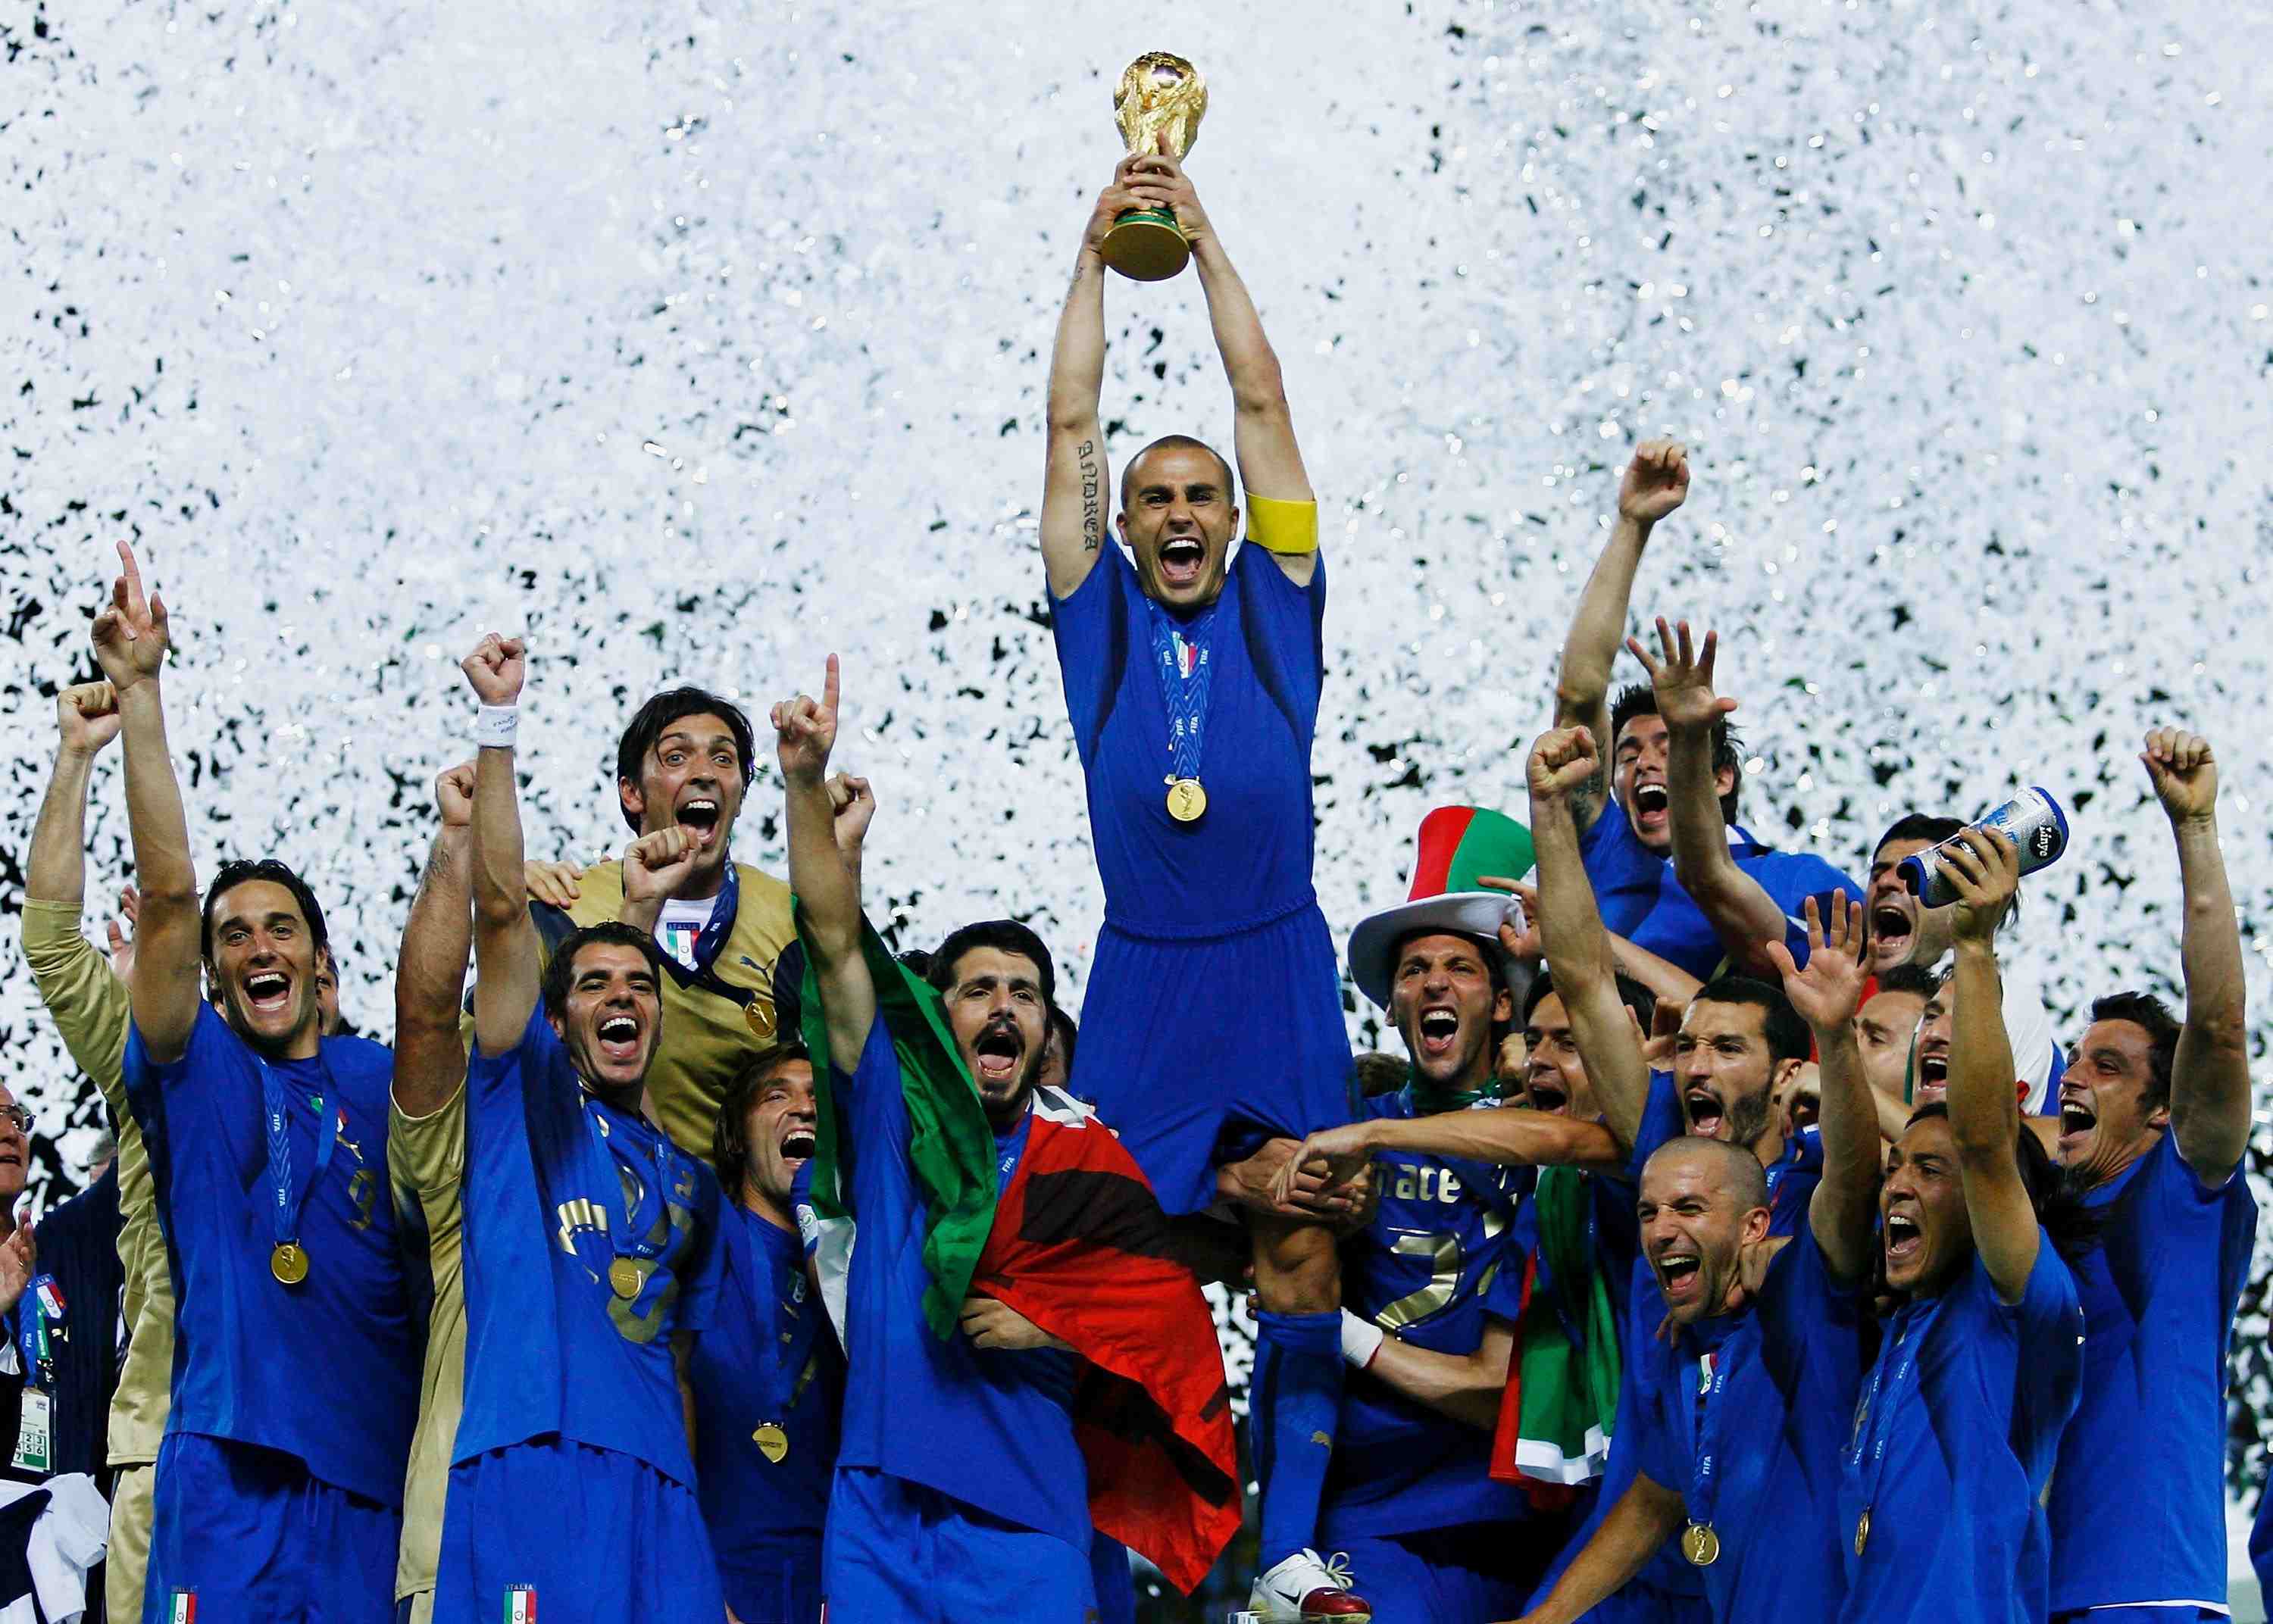 Ten iconic Italy-France moments - Cannavaro goes up for the cup - 2006 - Goal.com3000 x 2144